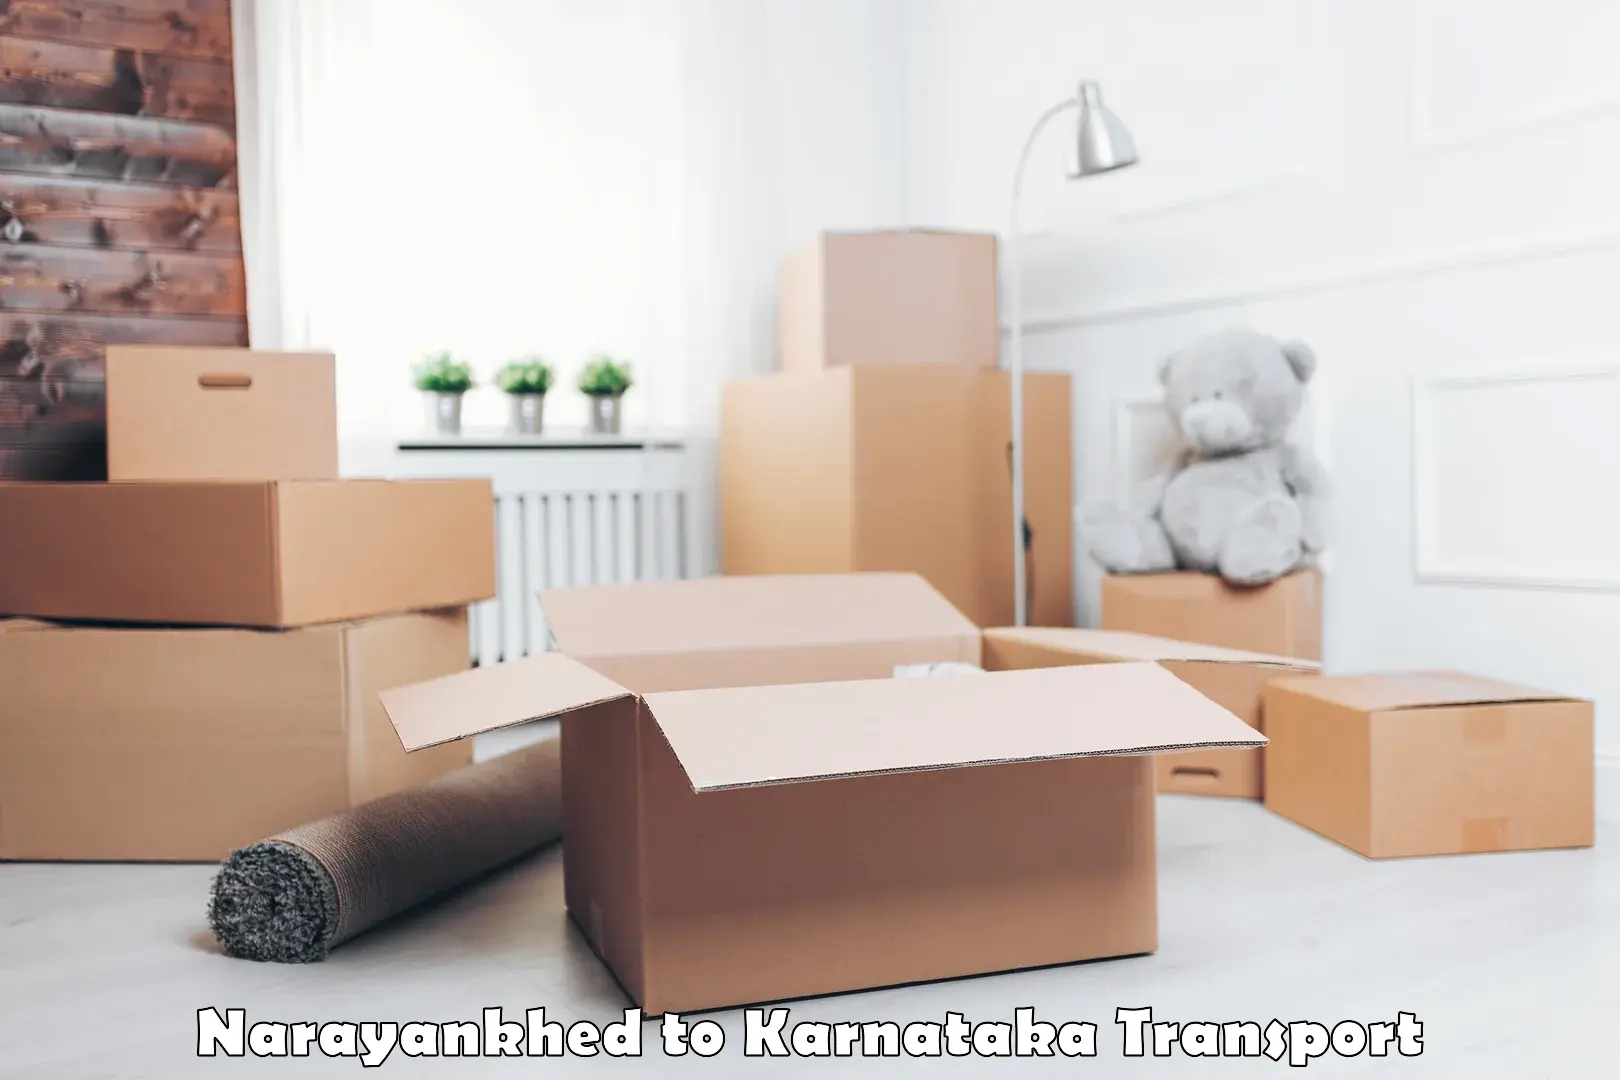 Domestic goods transportation services Narayankhed to Channagiri